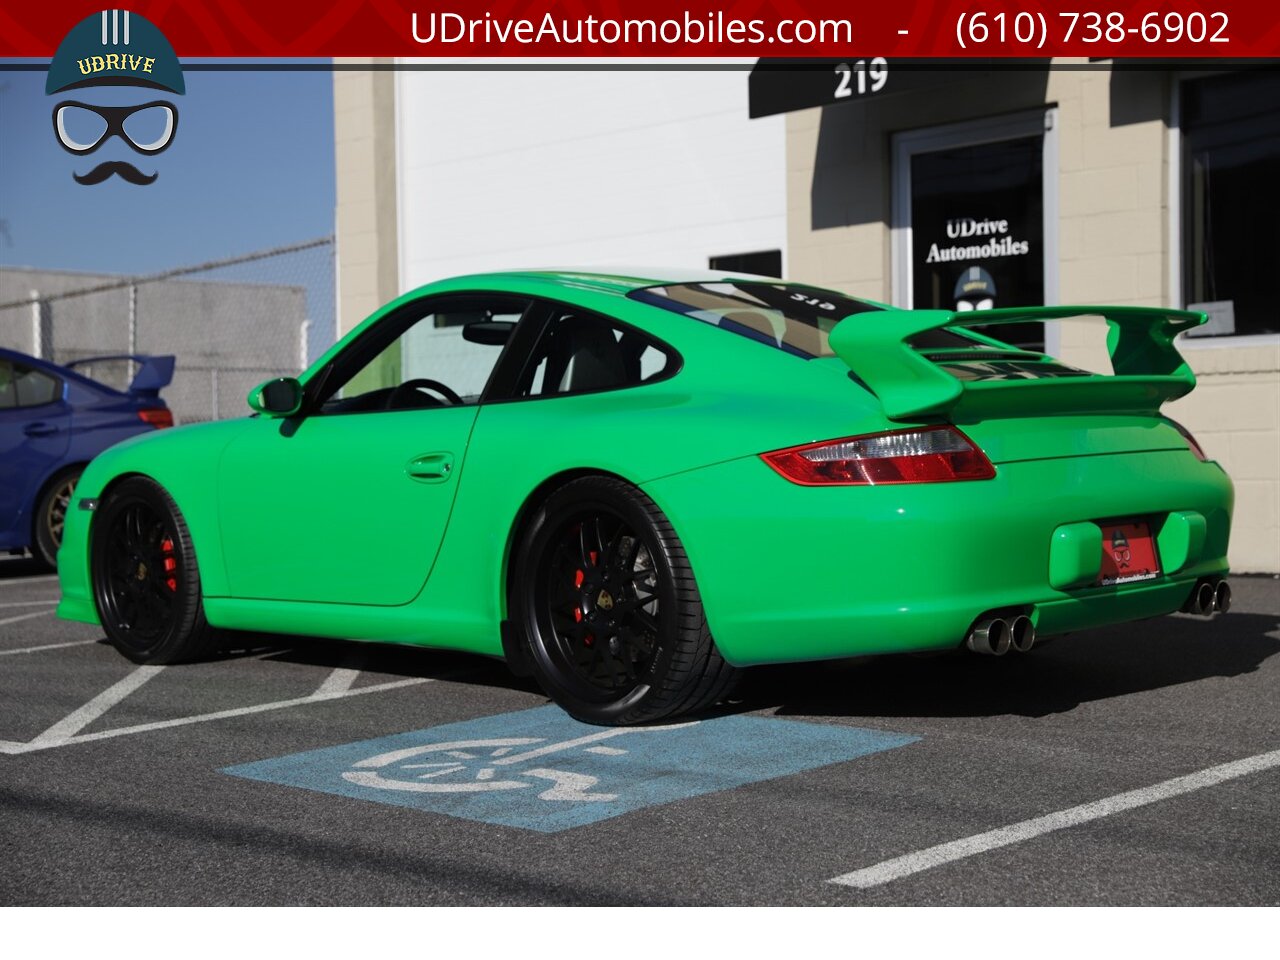 2008 Porsche 911 S 997 6Sp PTS RS Green AeroKit 1of a Kind  $118k MSRP Champion F77 Pkg RG5 Whls - Photo 24 - West Chester, PA 19382